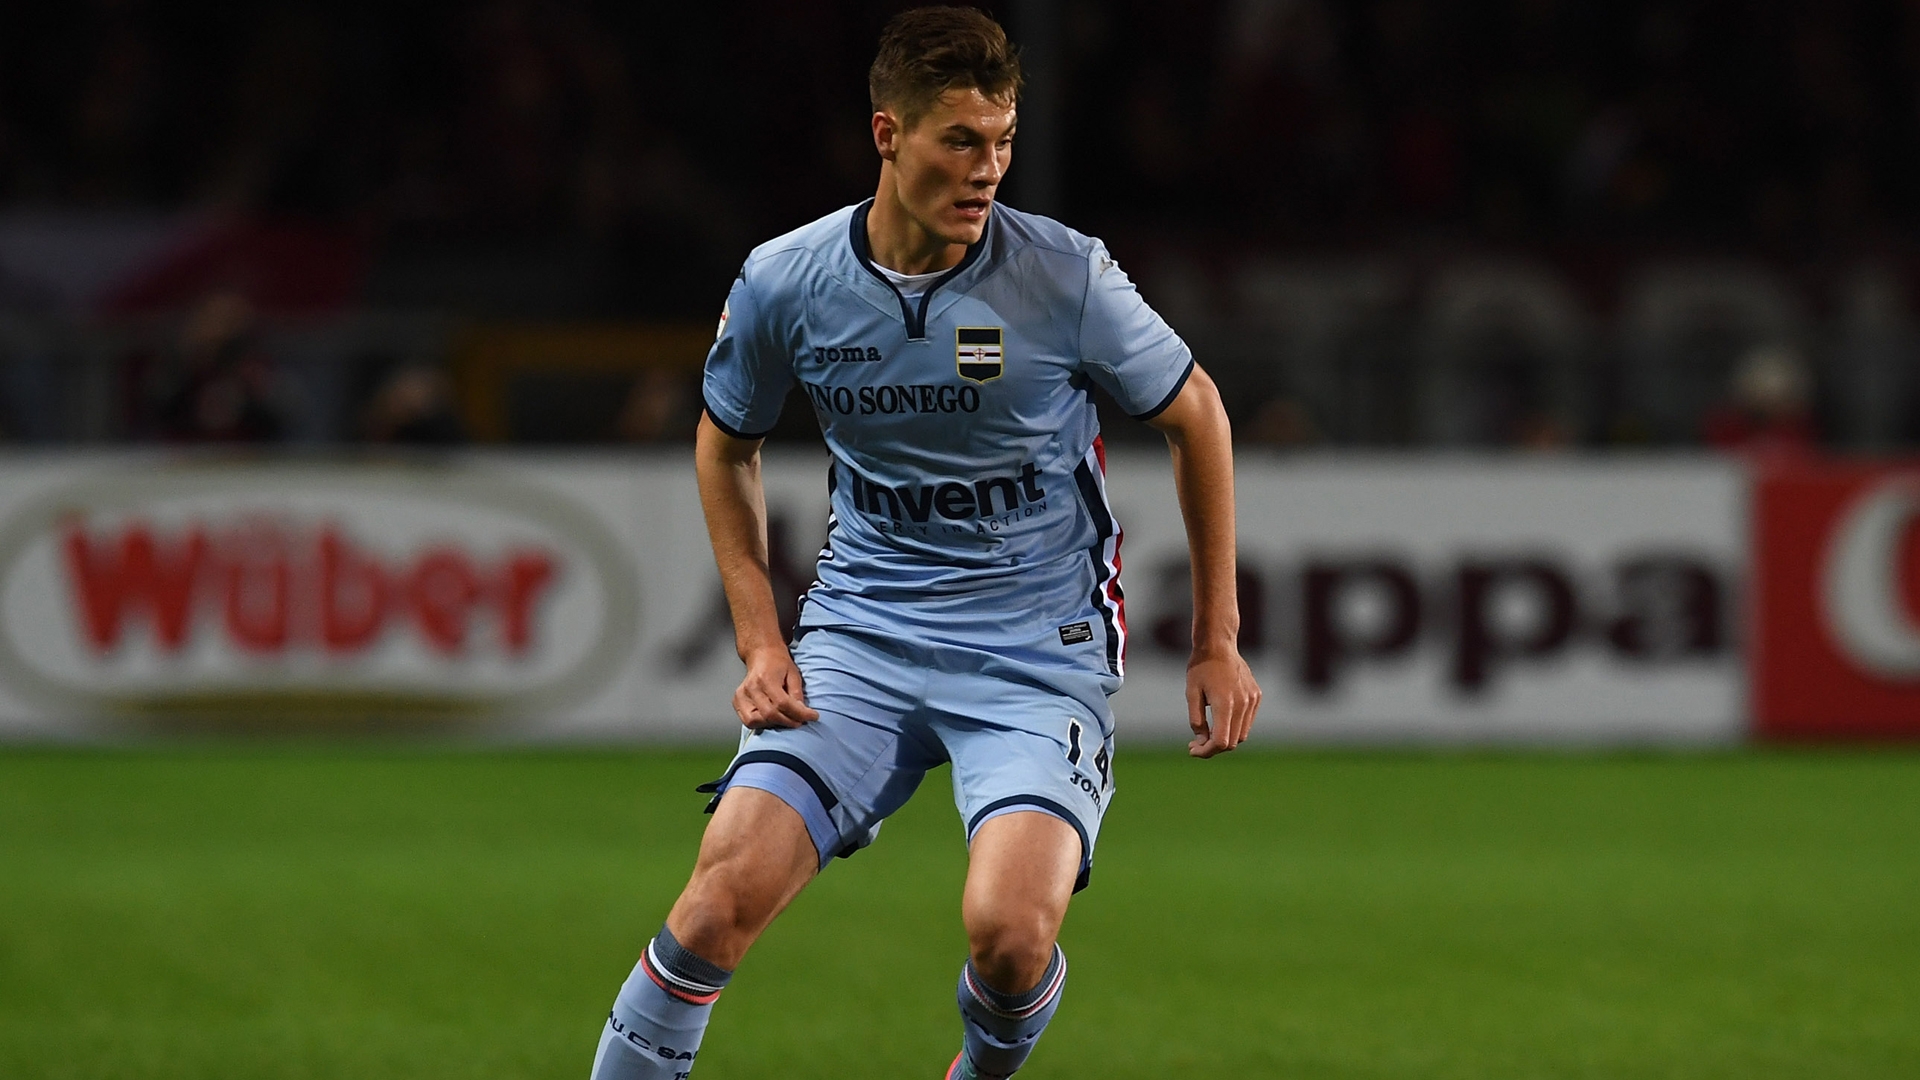 Juventus had recently announced that an agreement had been reached with Sampdoria over the transfer of Czech forward Patrik Schick, but the deal is now doubt.